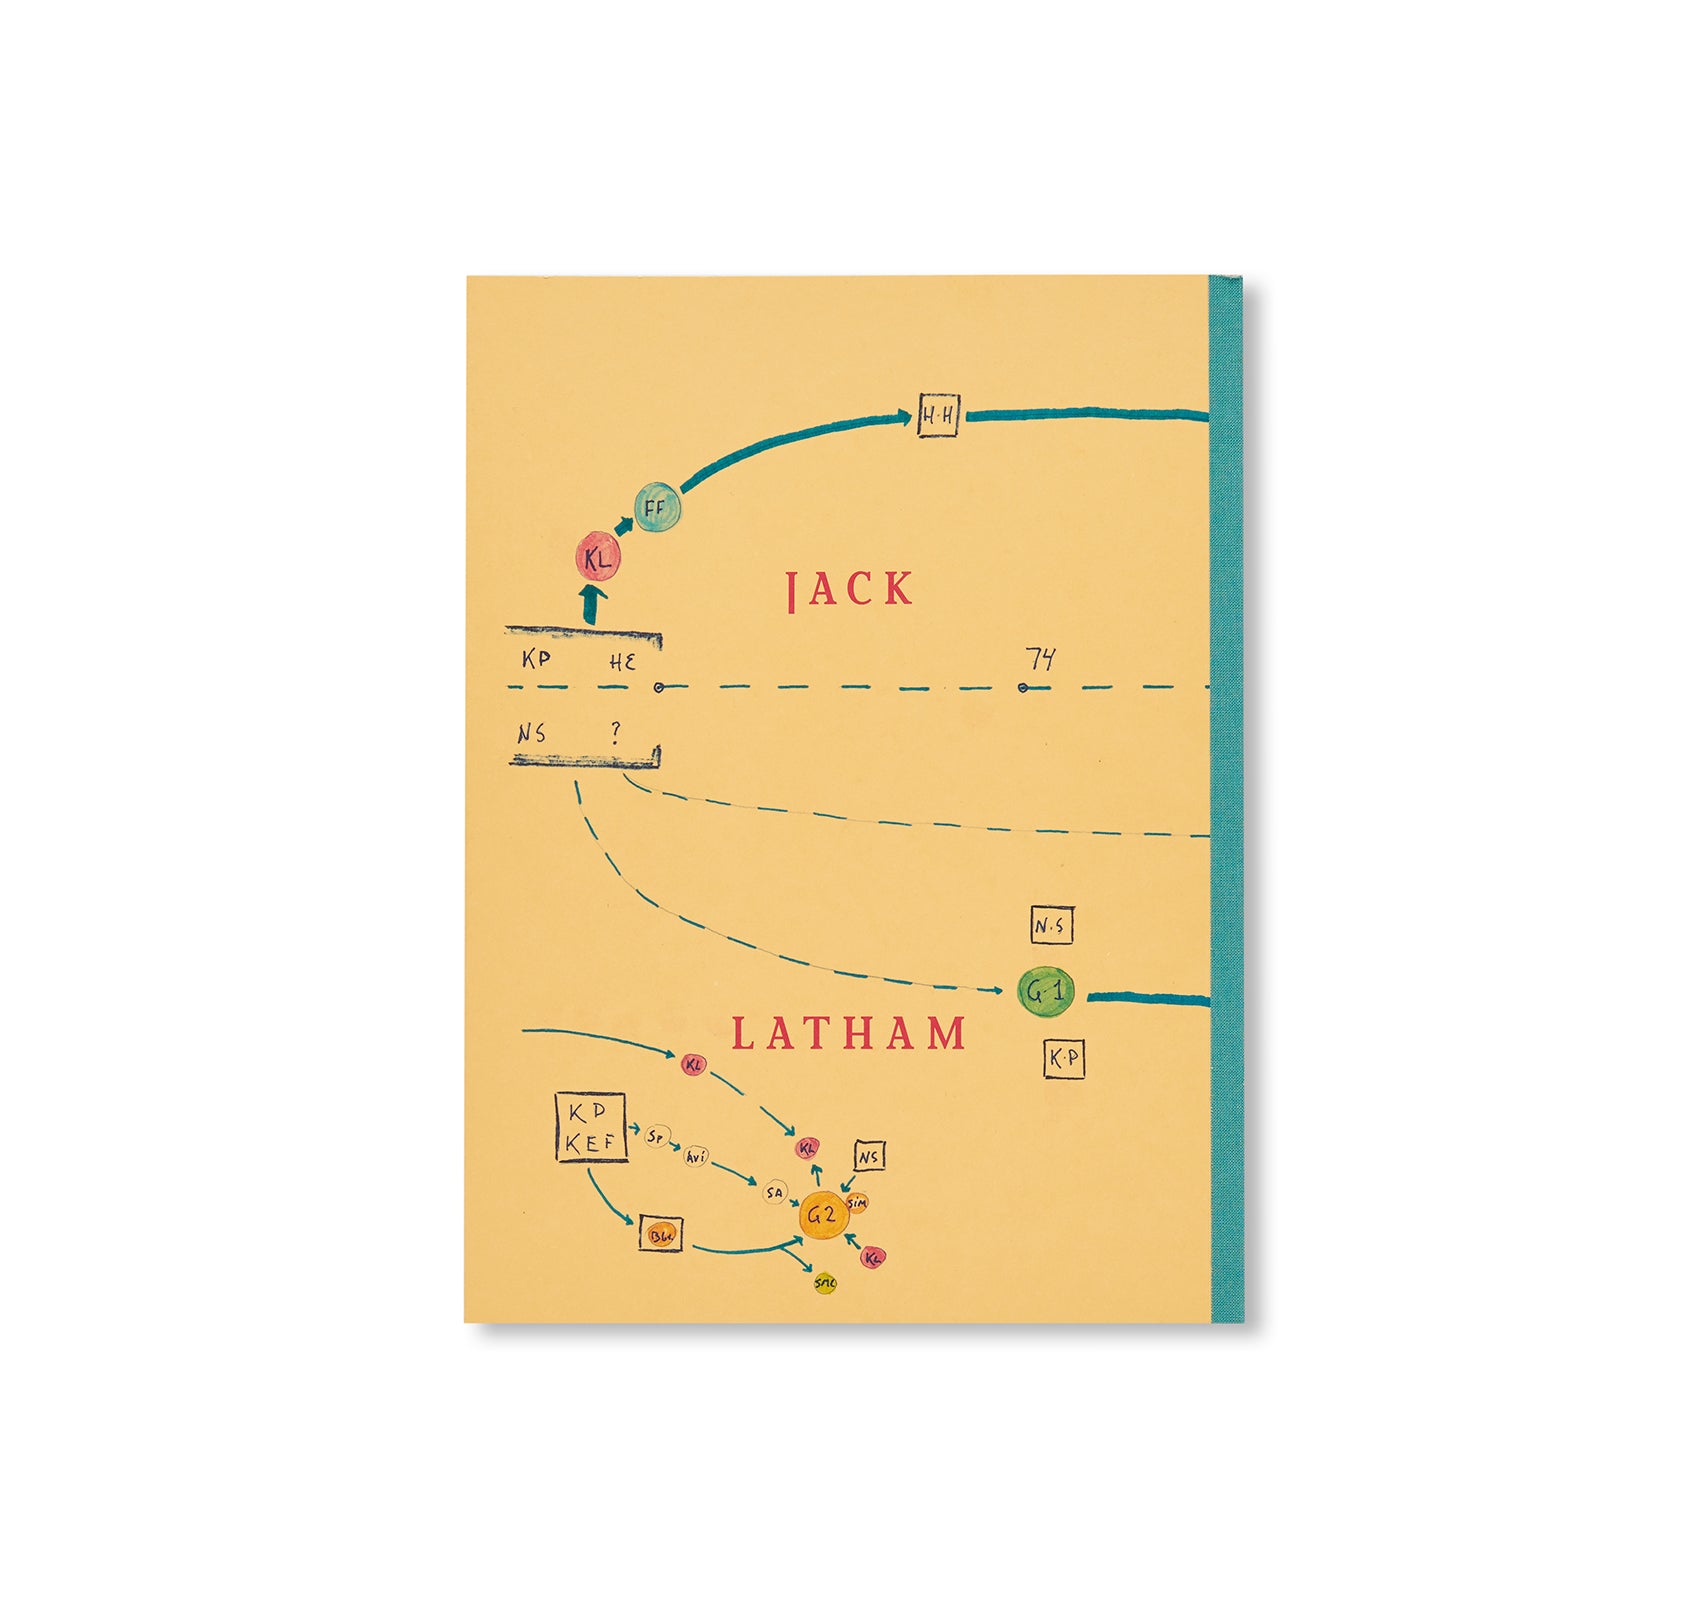 SUGAR PAPER THEORIES by Jack Latham [SECOND EDITION]